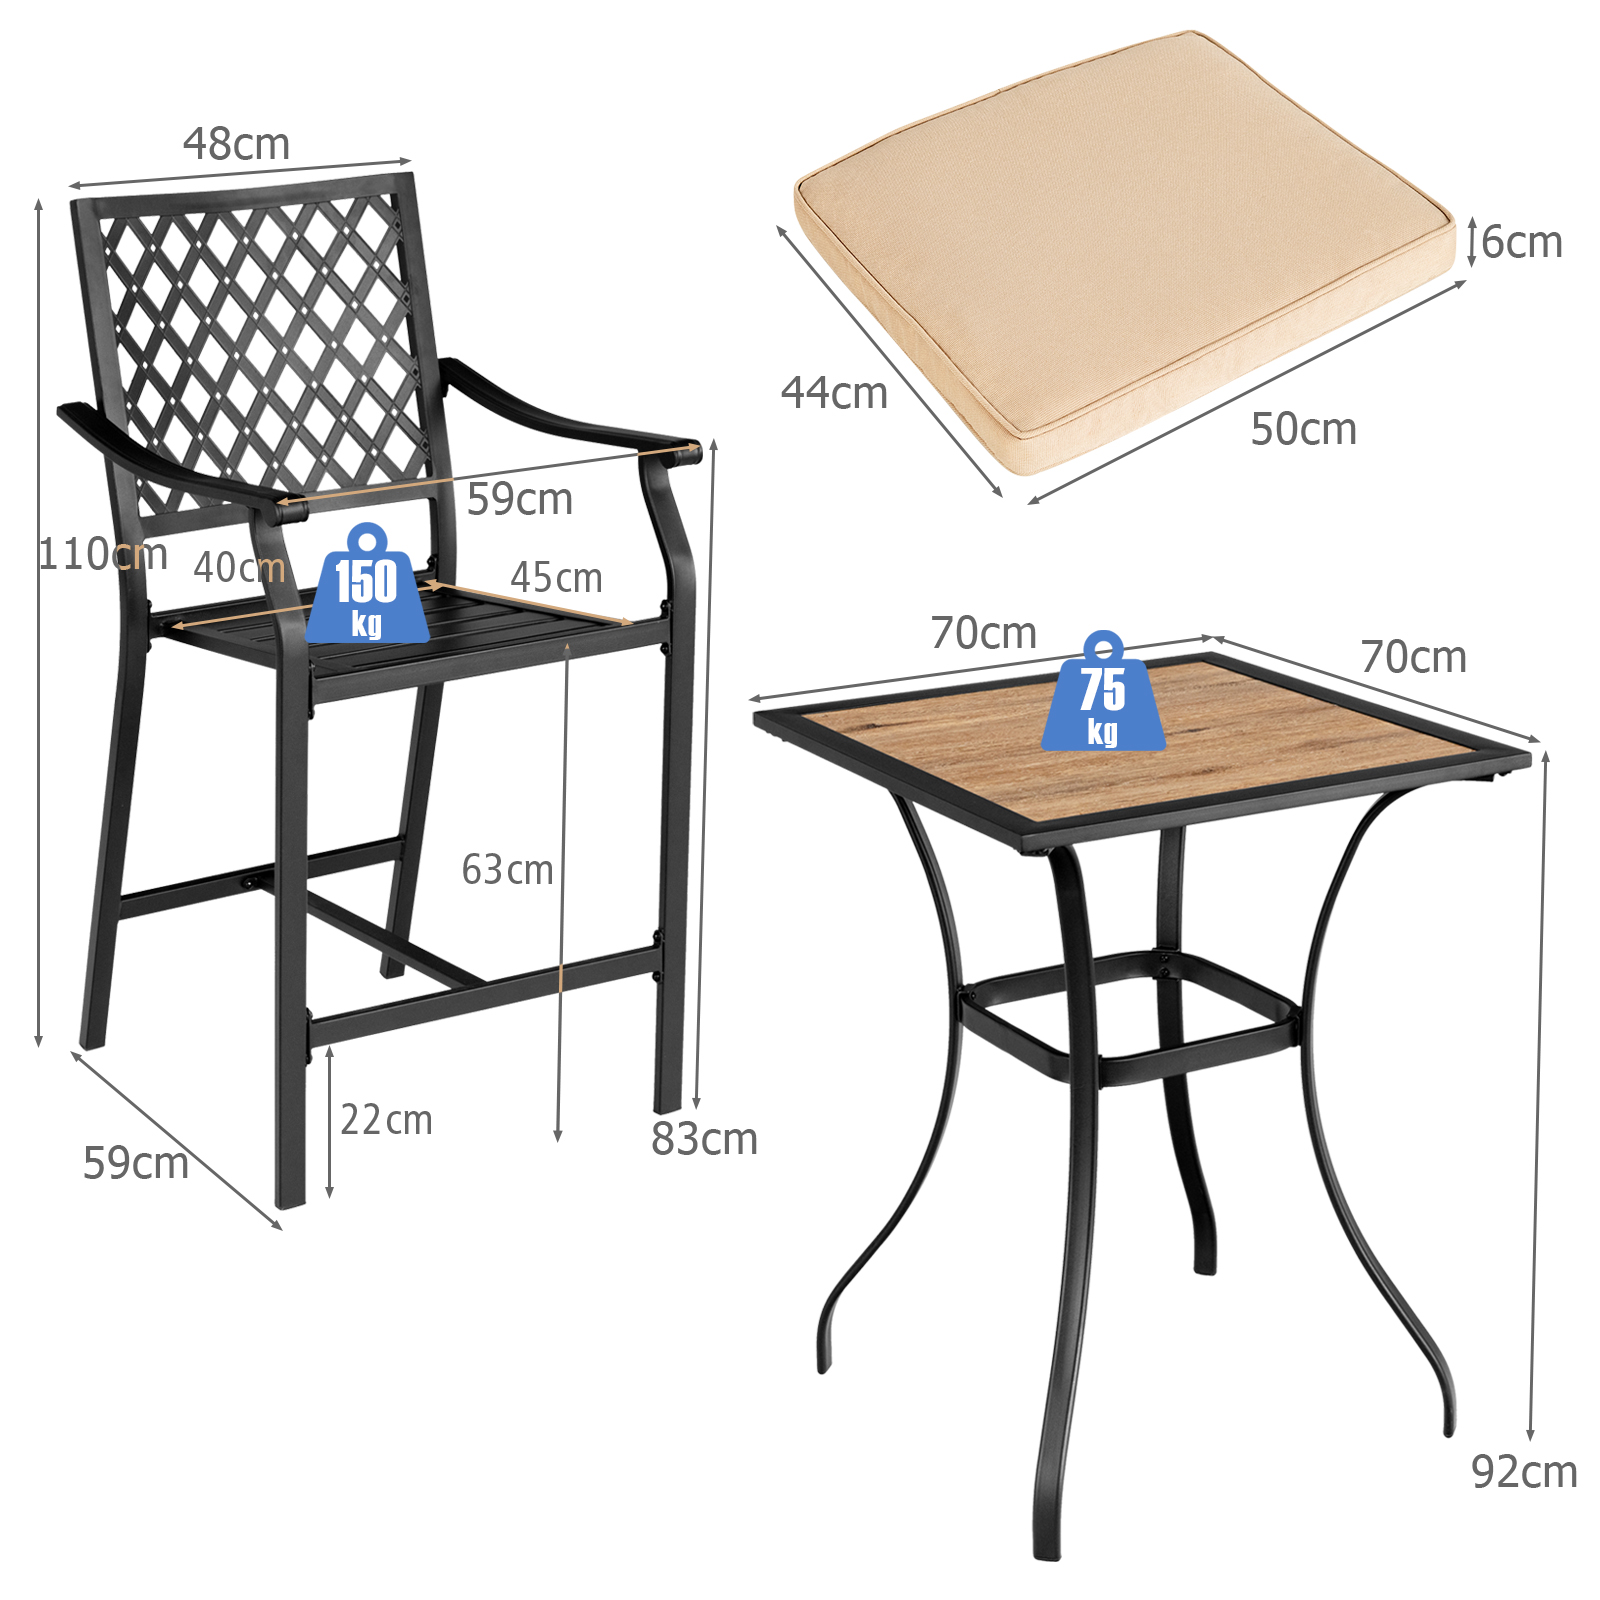 3_Pieces_Patio_Bar_Set_with_High_Density_Seat_Cushions-5.jpg